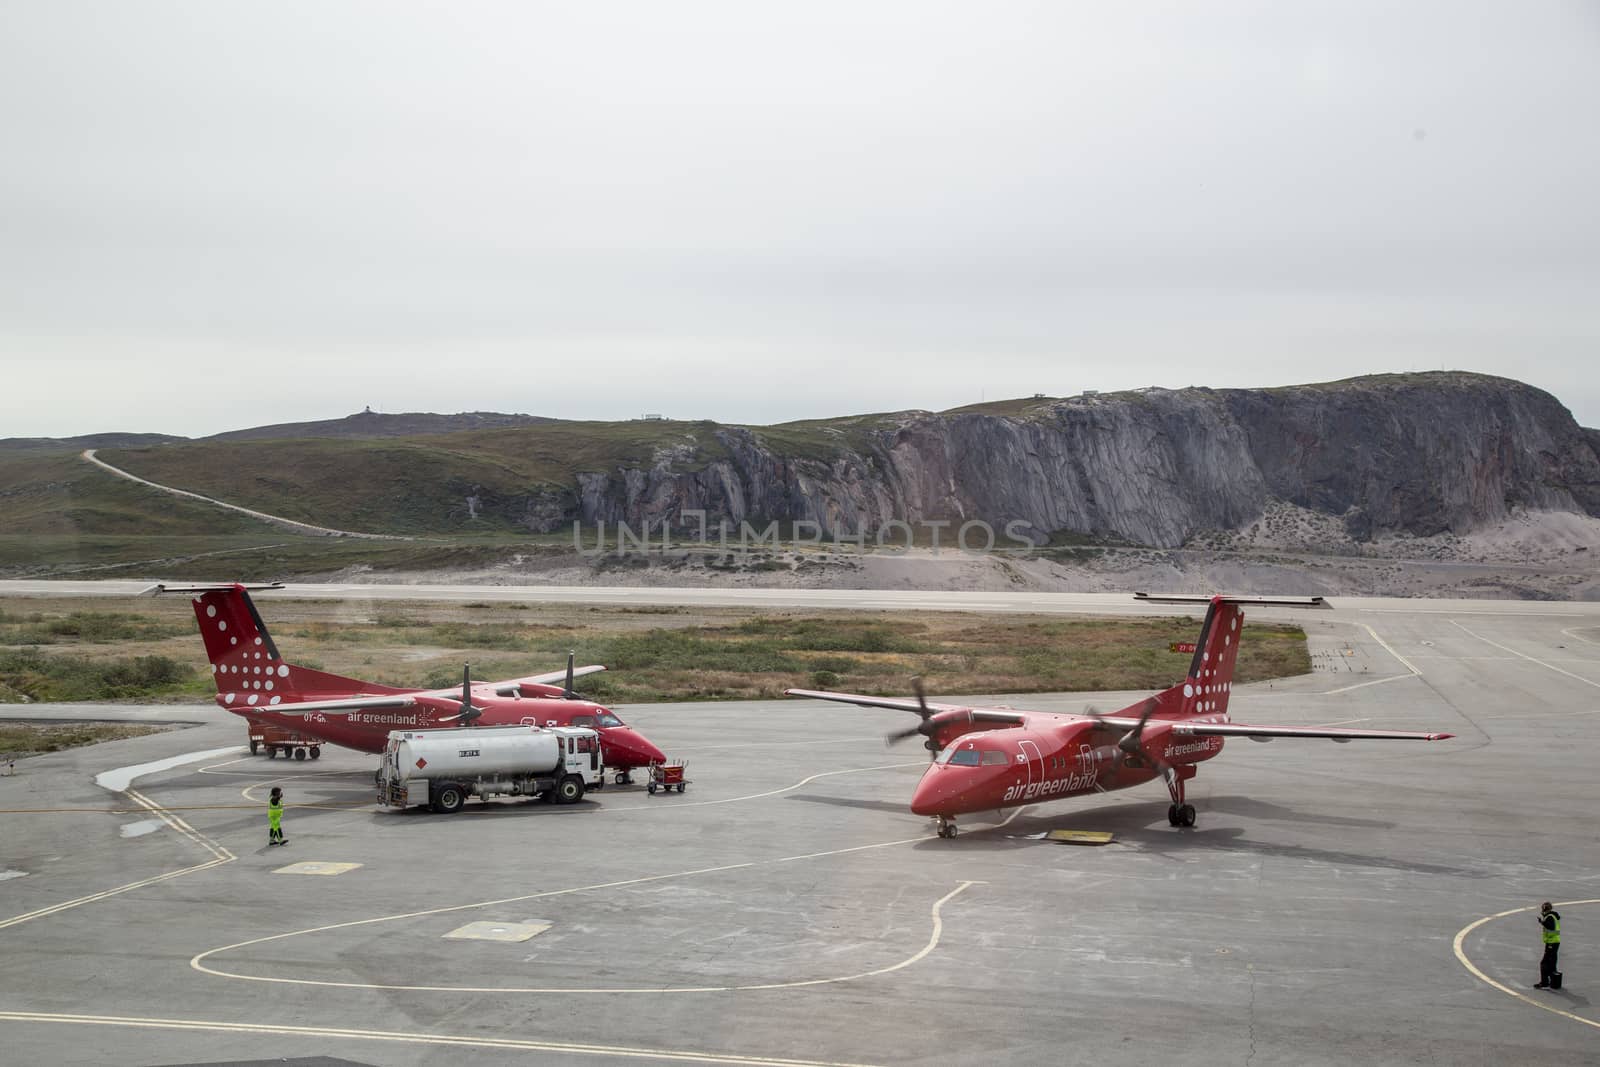 Kangerlussuaq, Greenland - June 30, 2018: Two Bombardier Dash 8 Q200 aircrafts operated by Air Greenland at the international airport